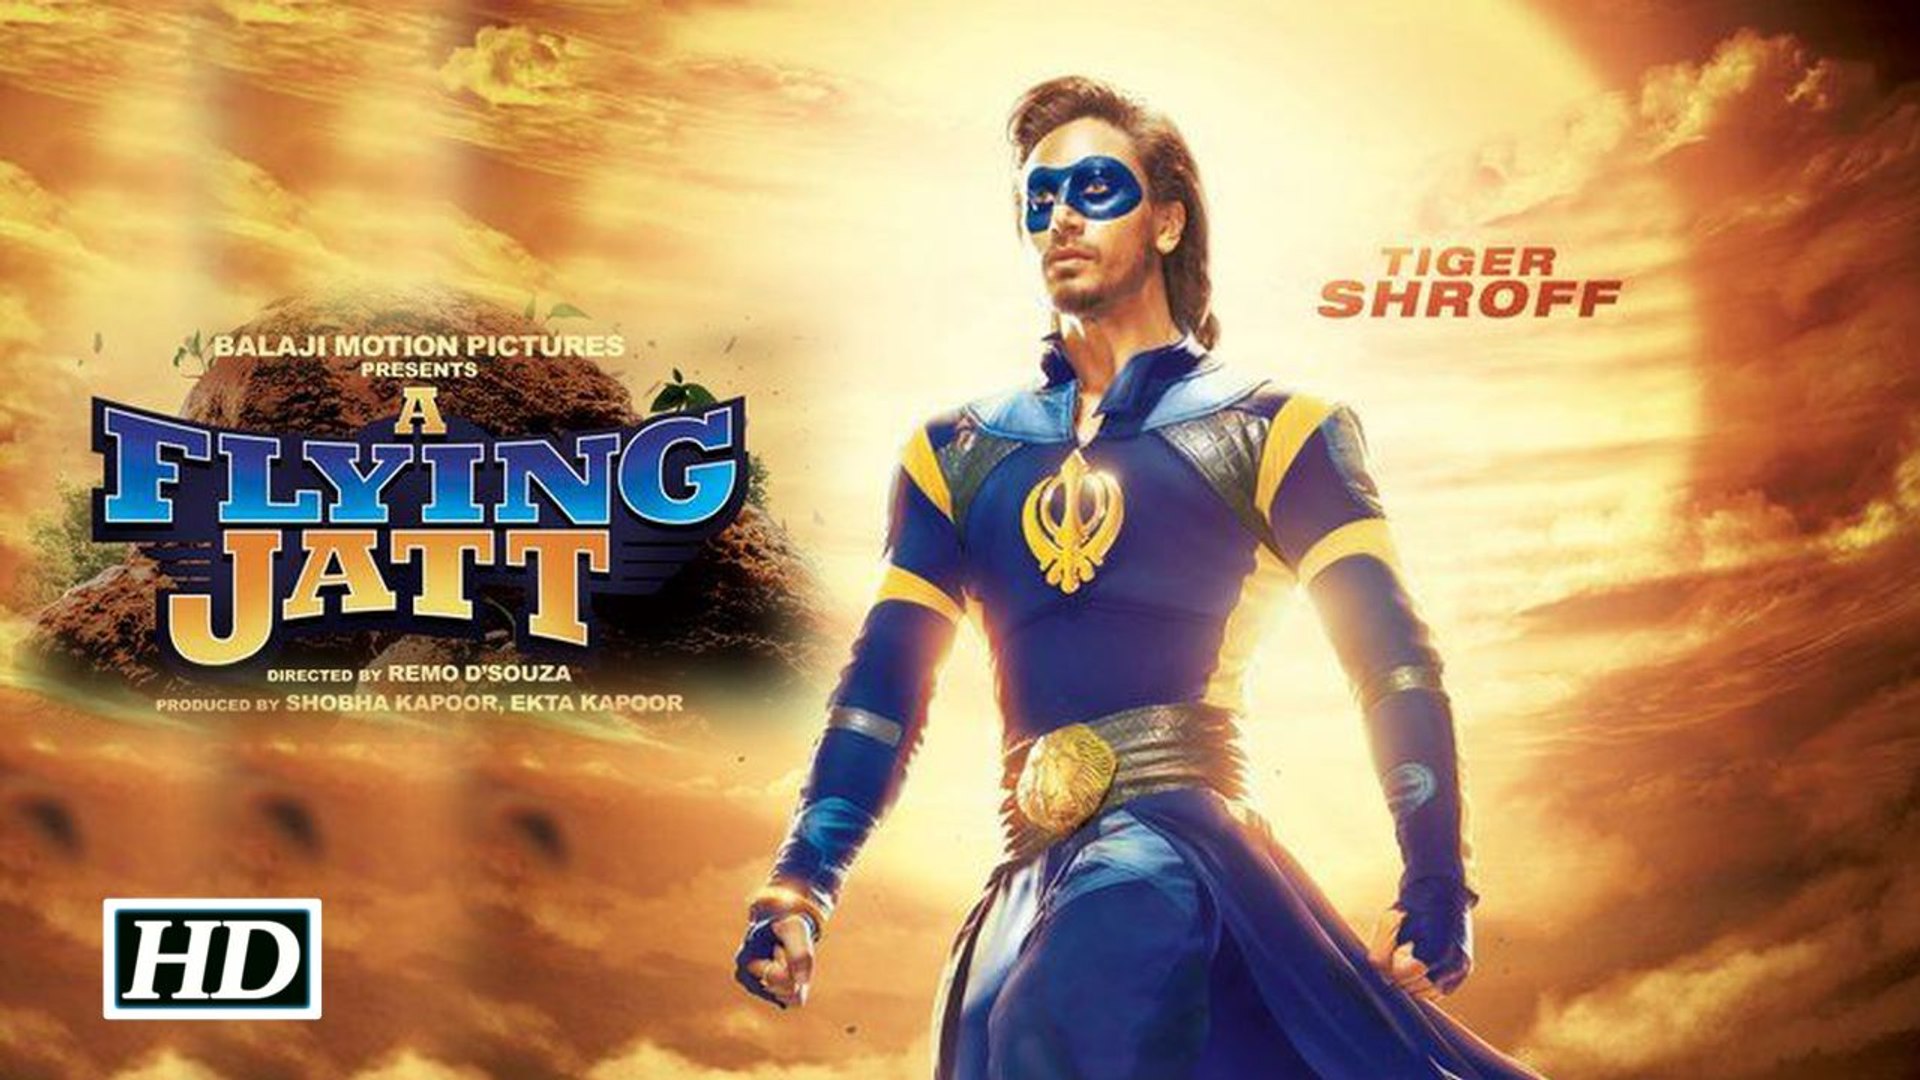 A Flying Jatt First Look Starring Tiger Shroff and Nathan Jones - video  Dailymotion